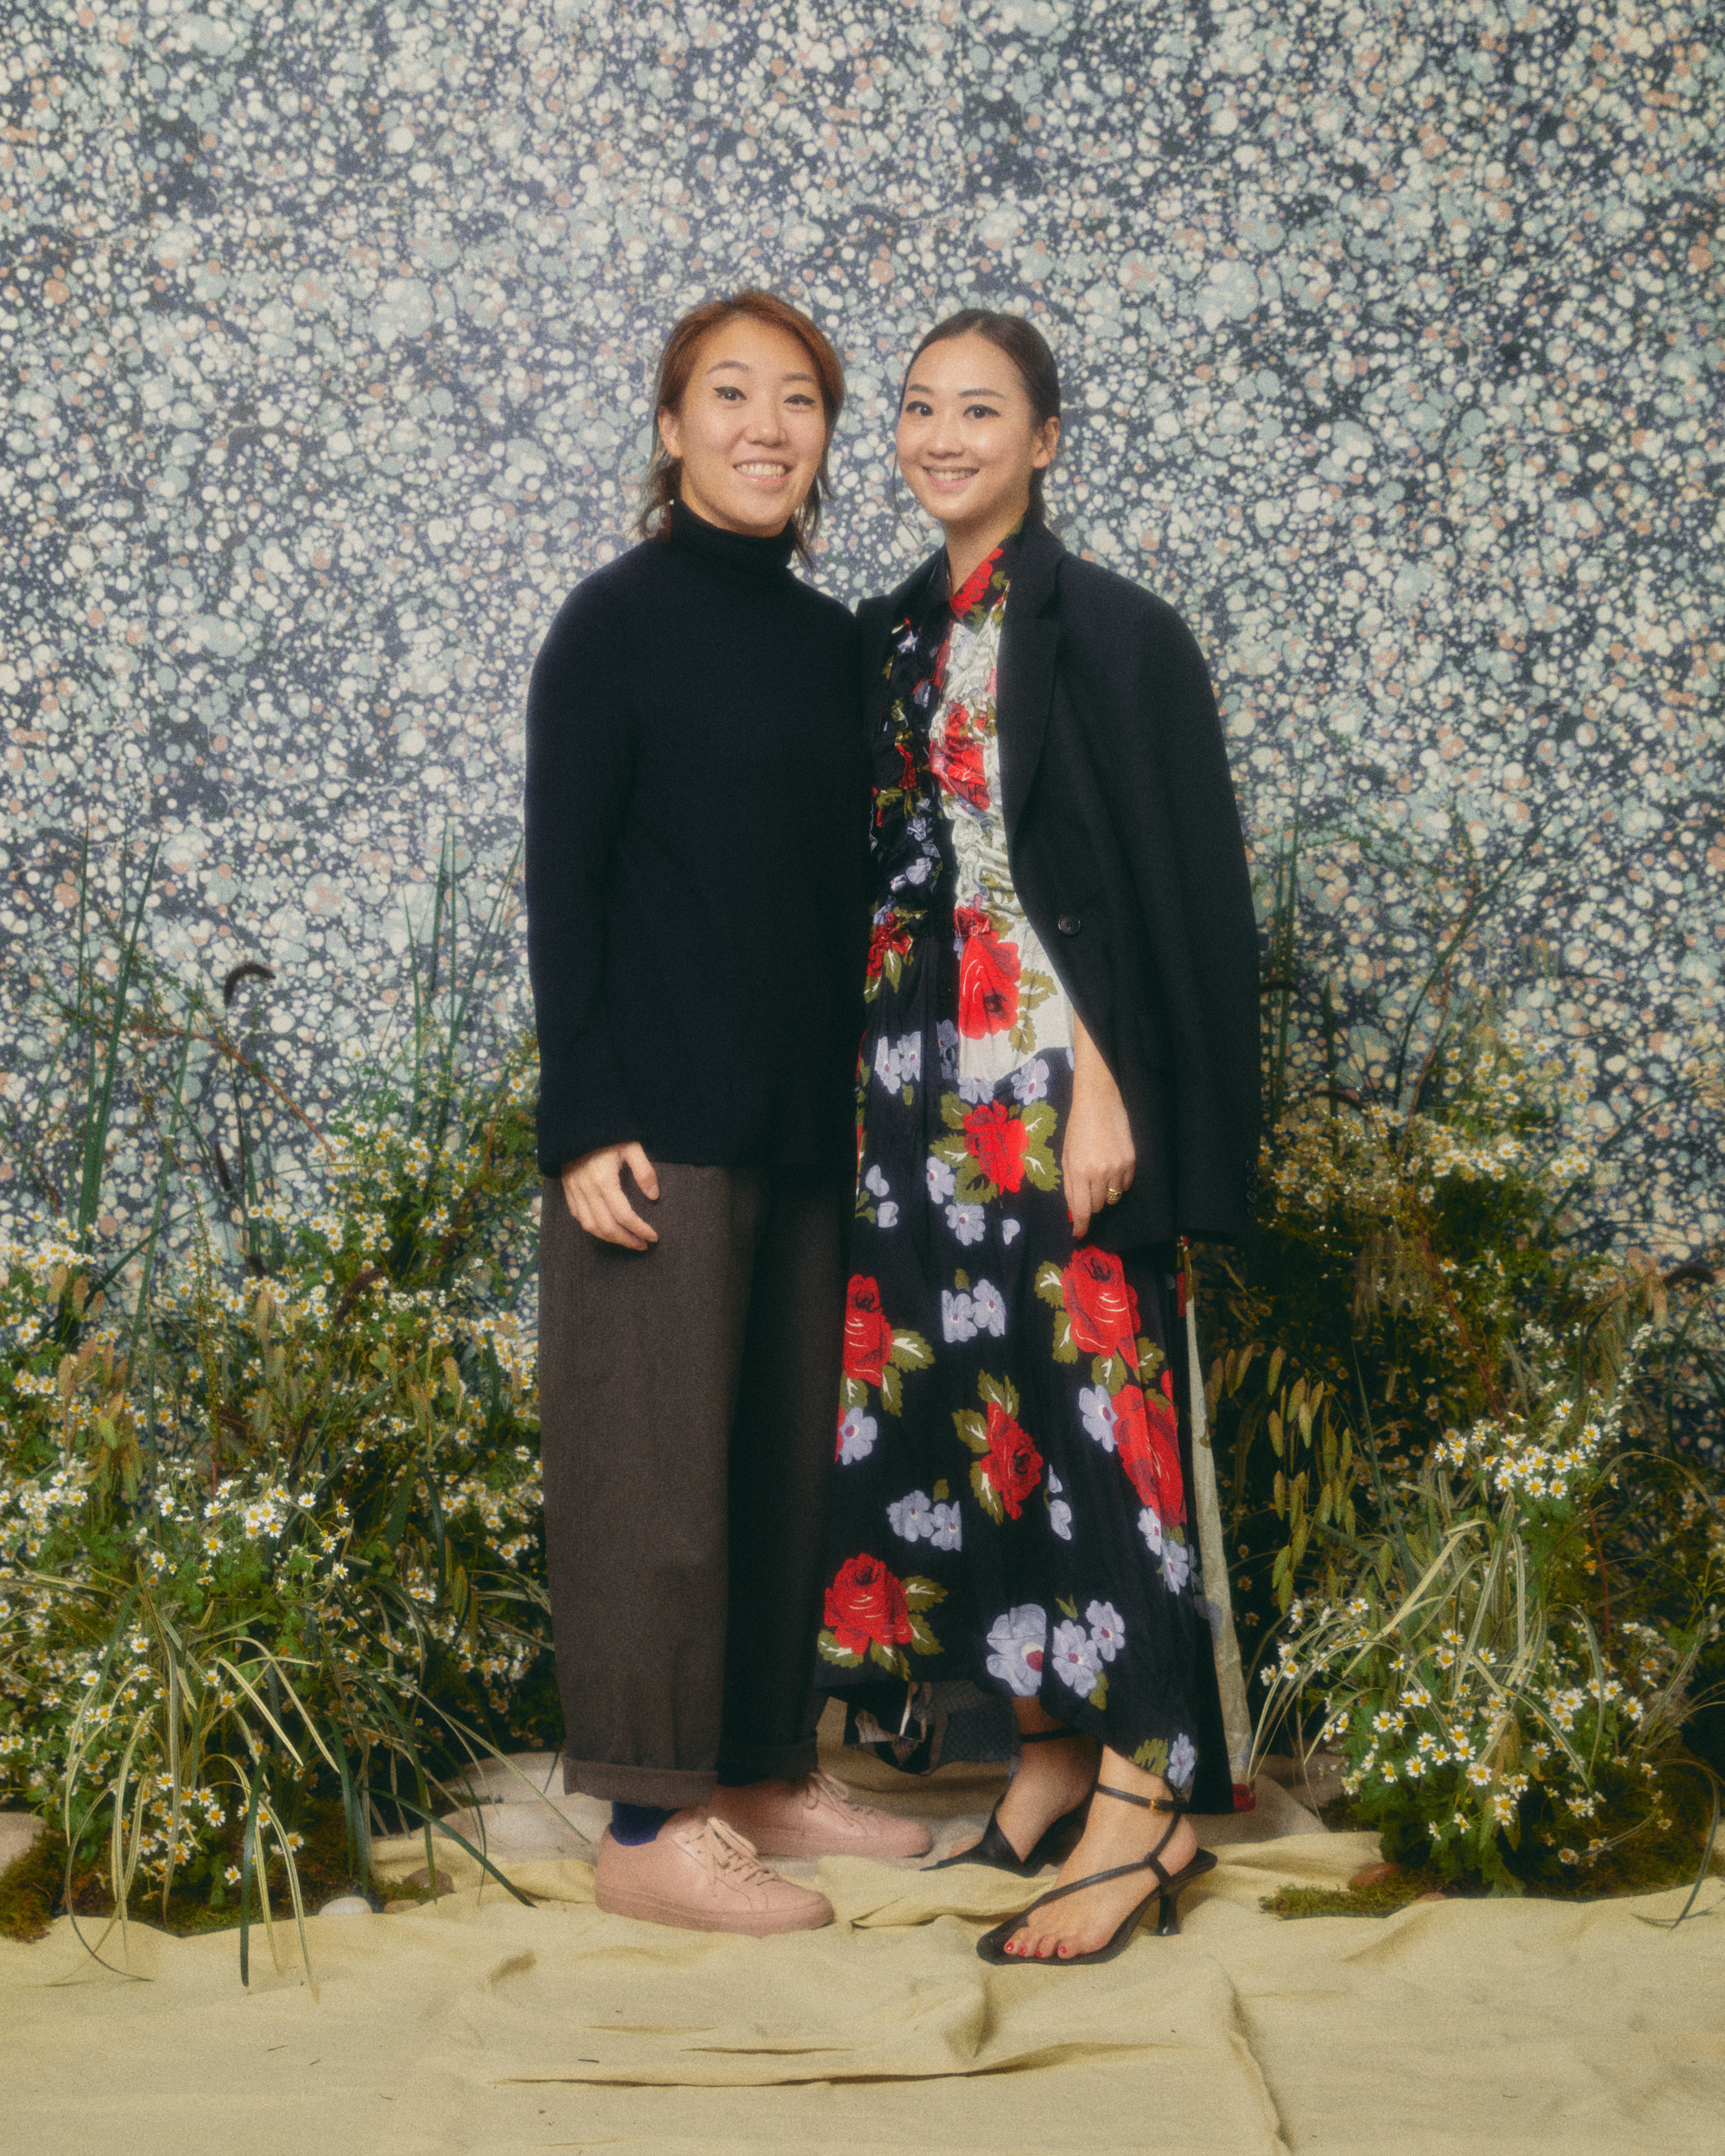 Jacqueline Chak (left) and Genevieve Chew, founders of Editecture, at the opening of a pop-up store designed and curated by them for Matchesfashion at Belowground, Landmark, Hong Kong. Photo: Alex Maeland